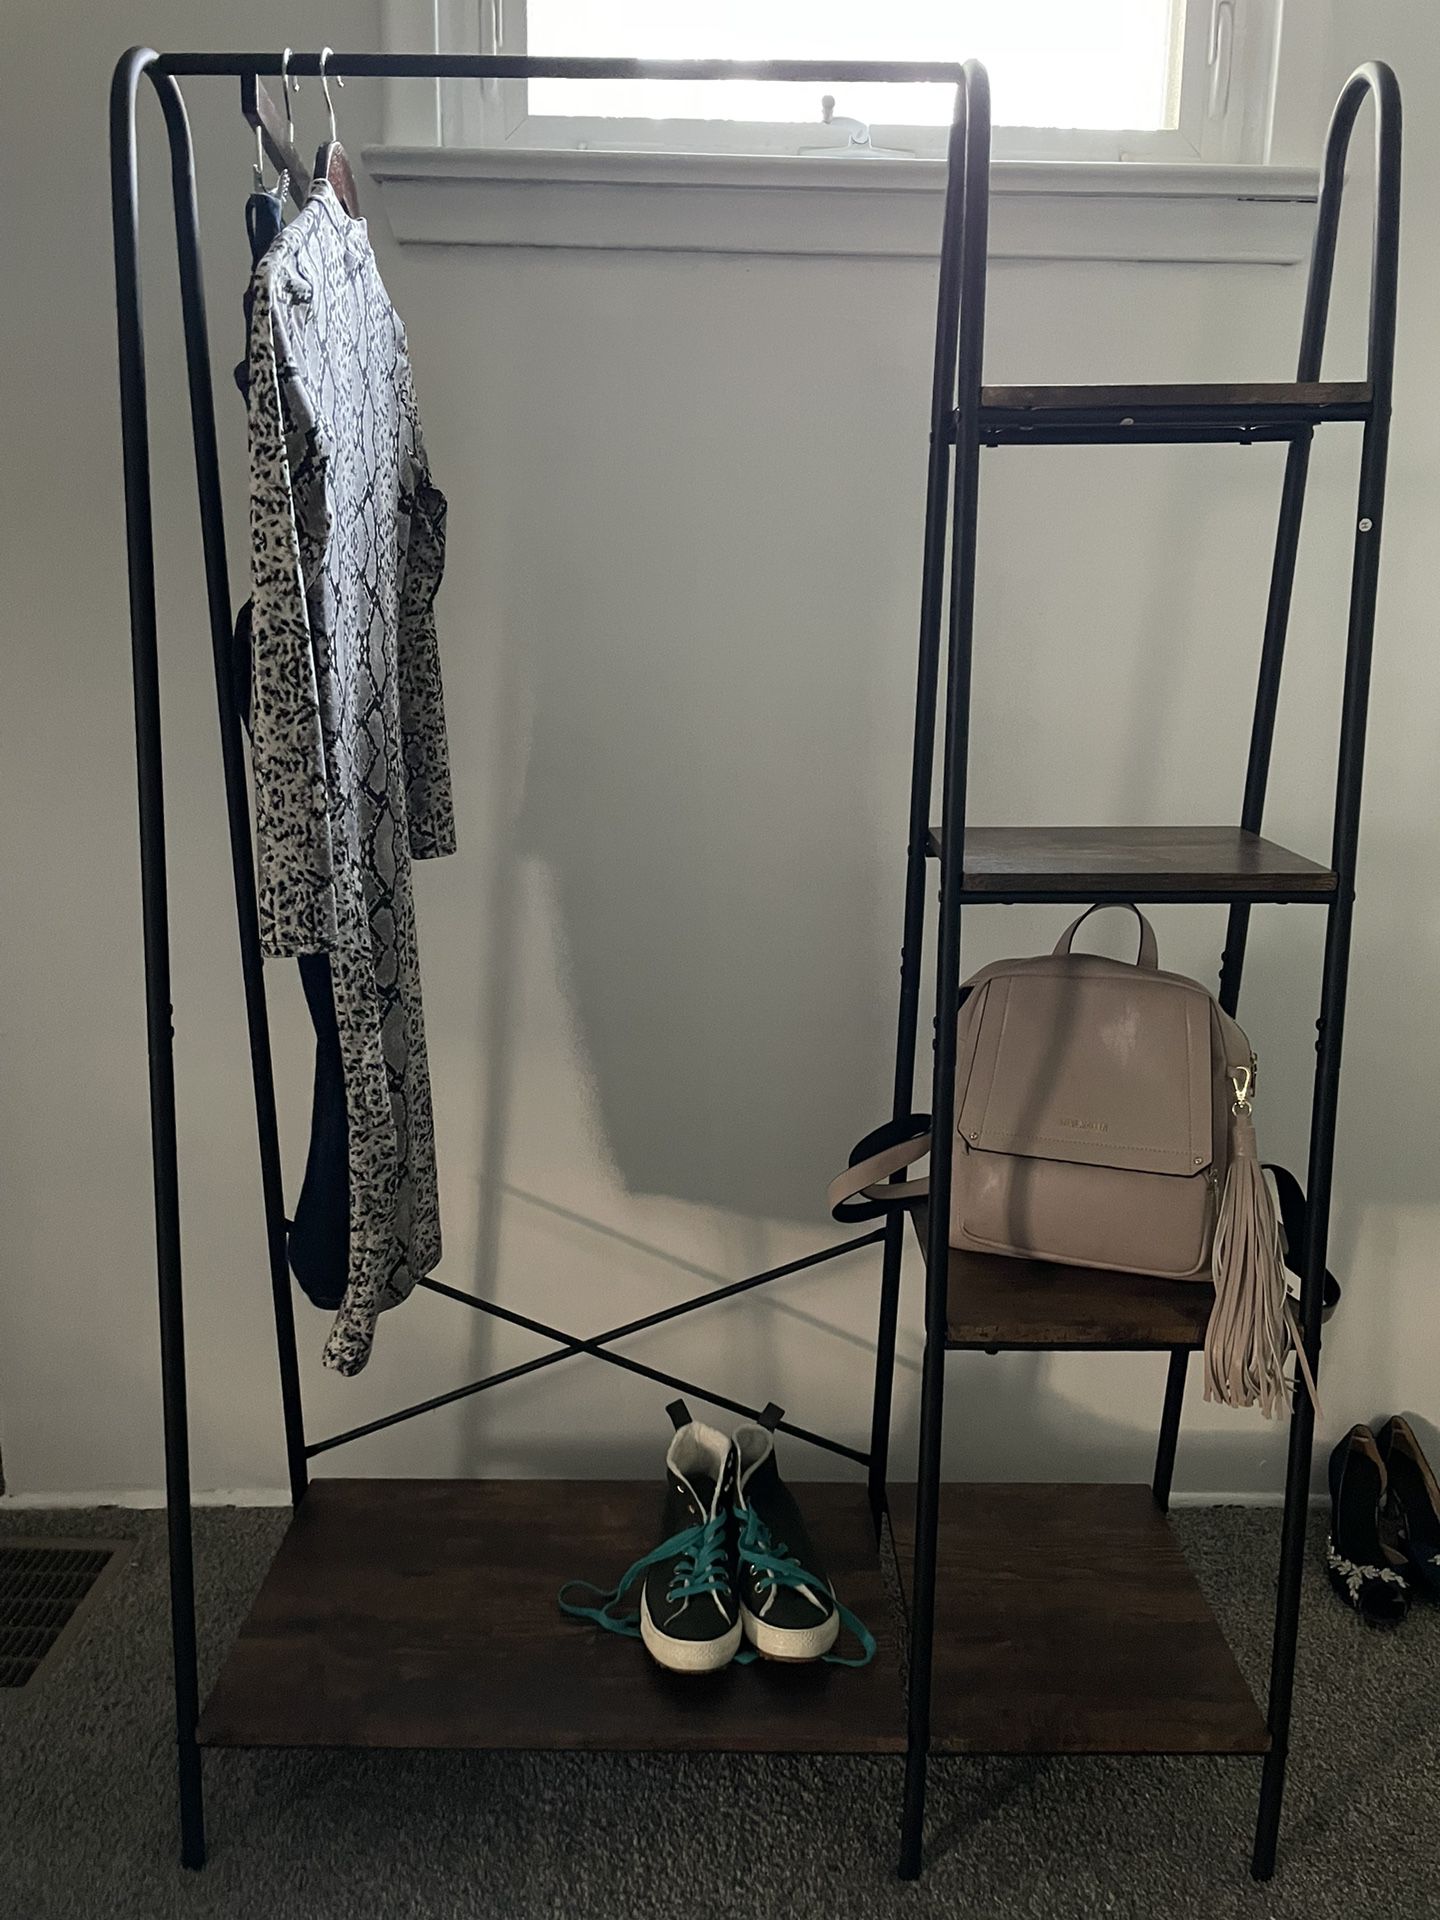  Clothing Rack With Shelves